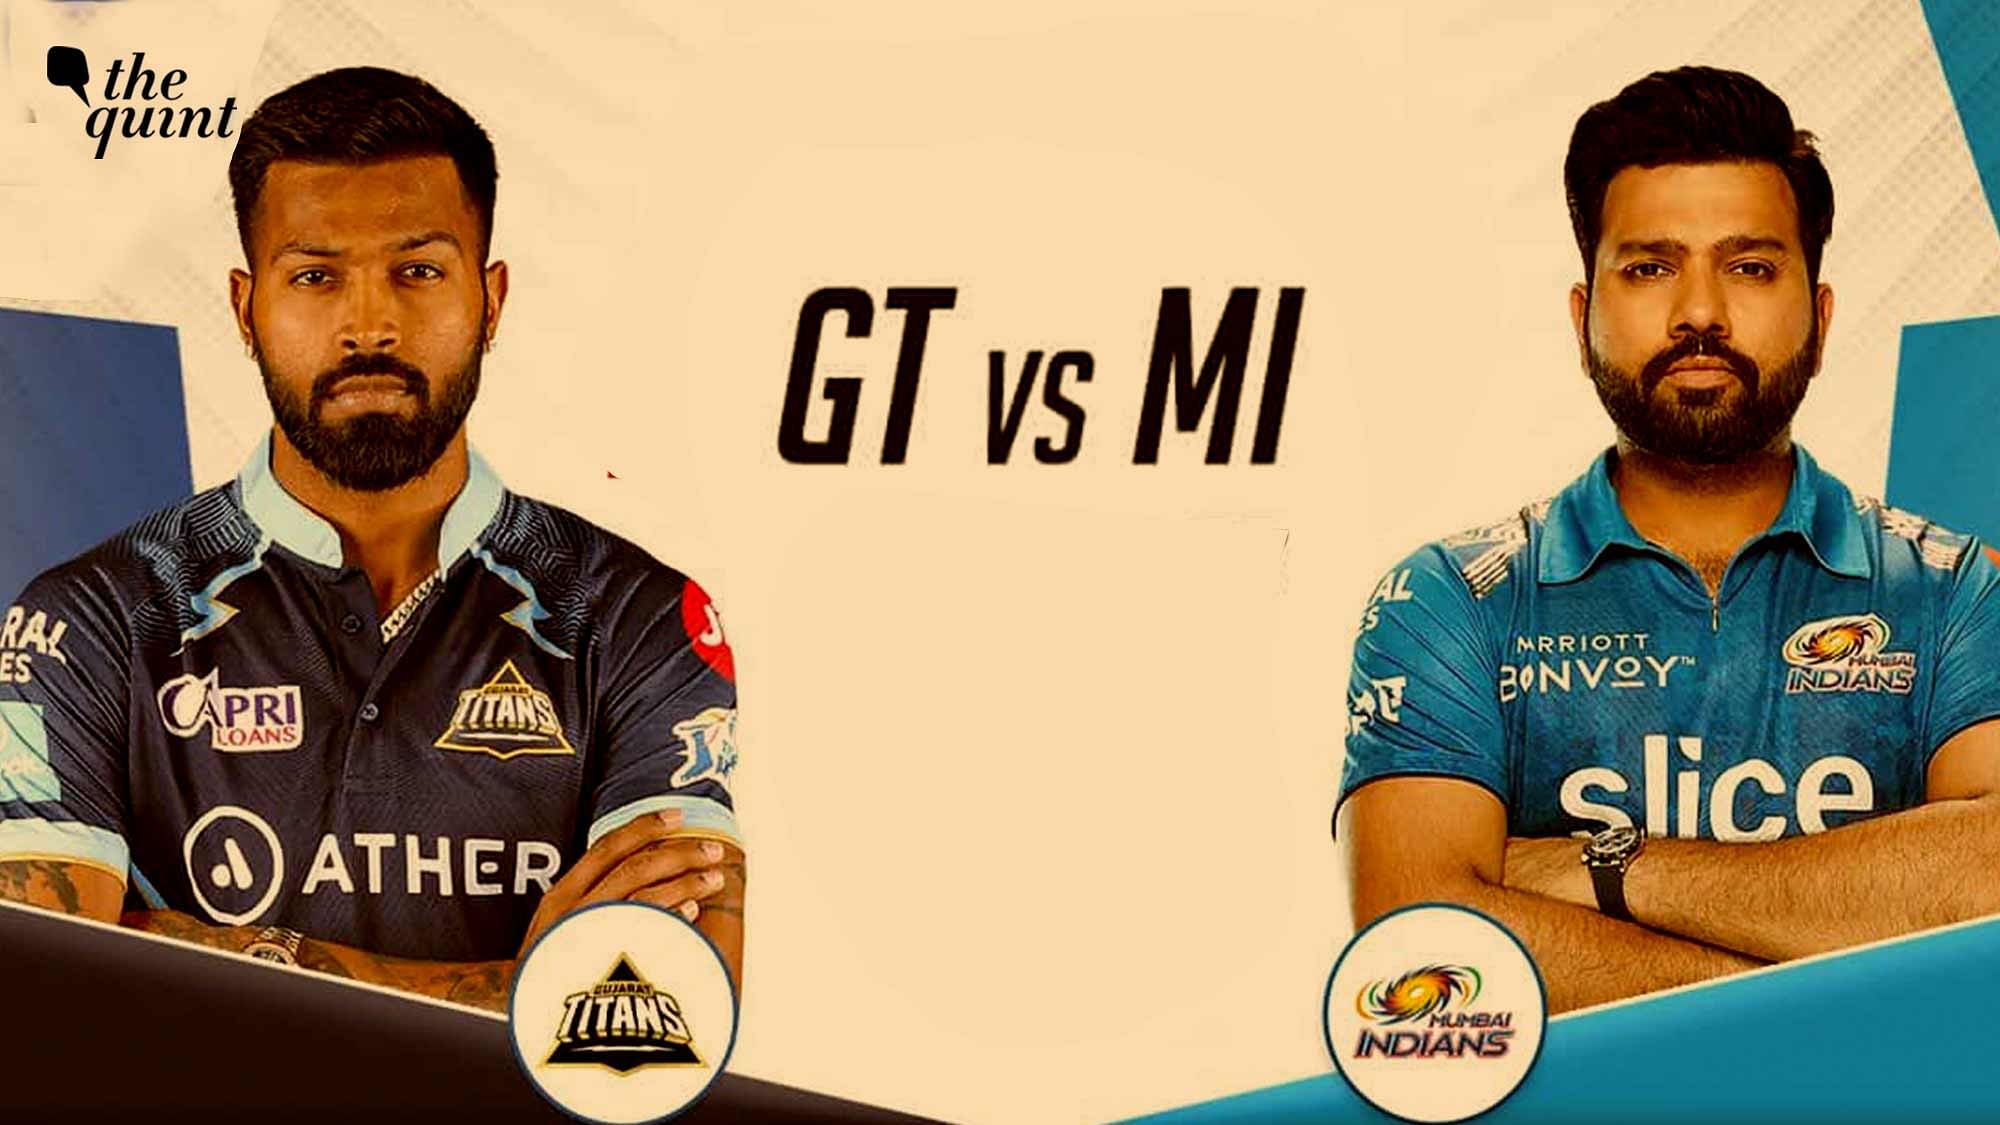 Mumbai Indians (MI) vs Gujarat Titans (GT) IPL 2023 Live Streaming, Telecast, Date, Time, Venue, and Everything You Must Know